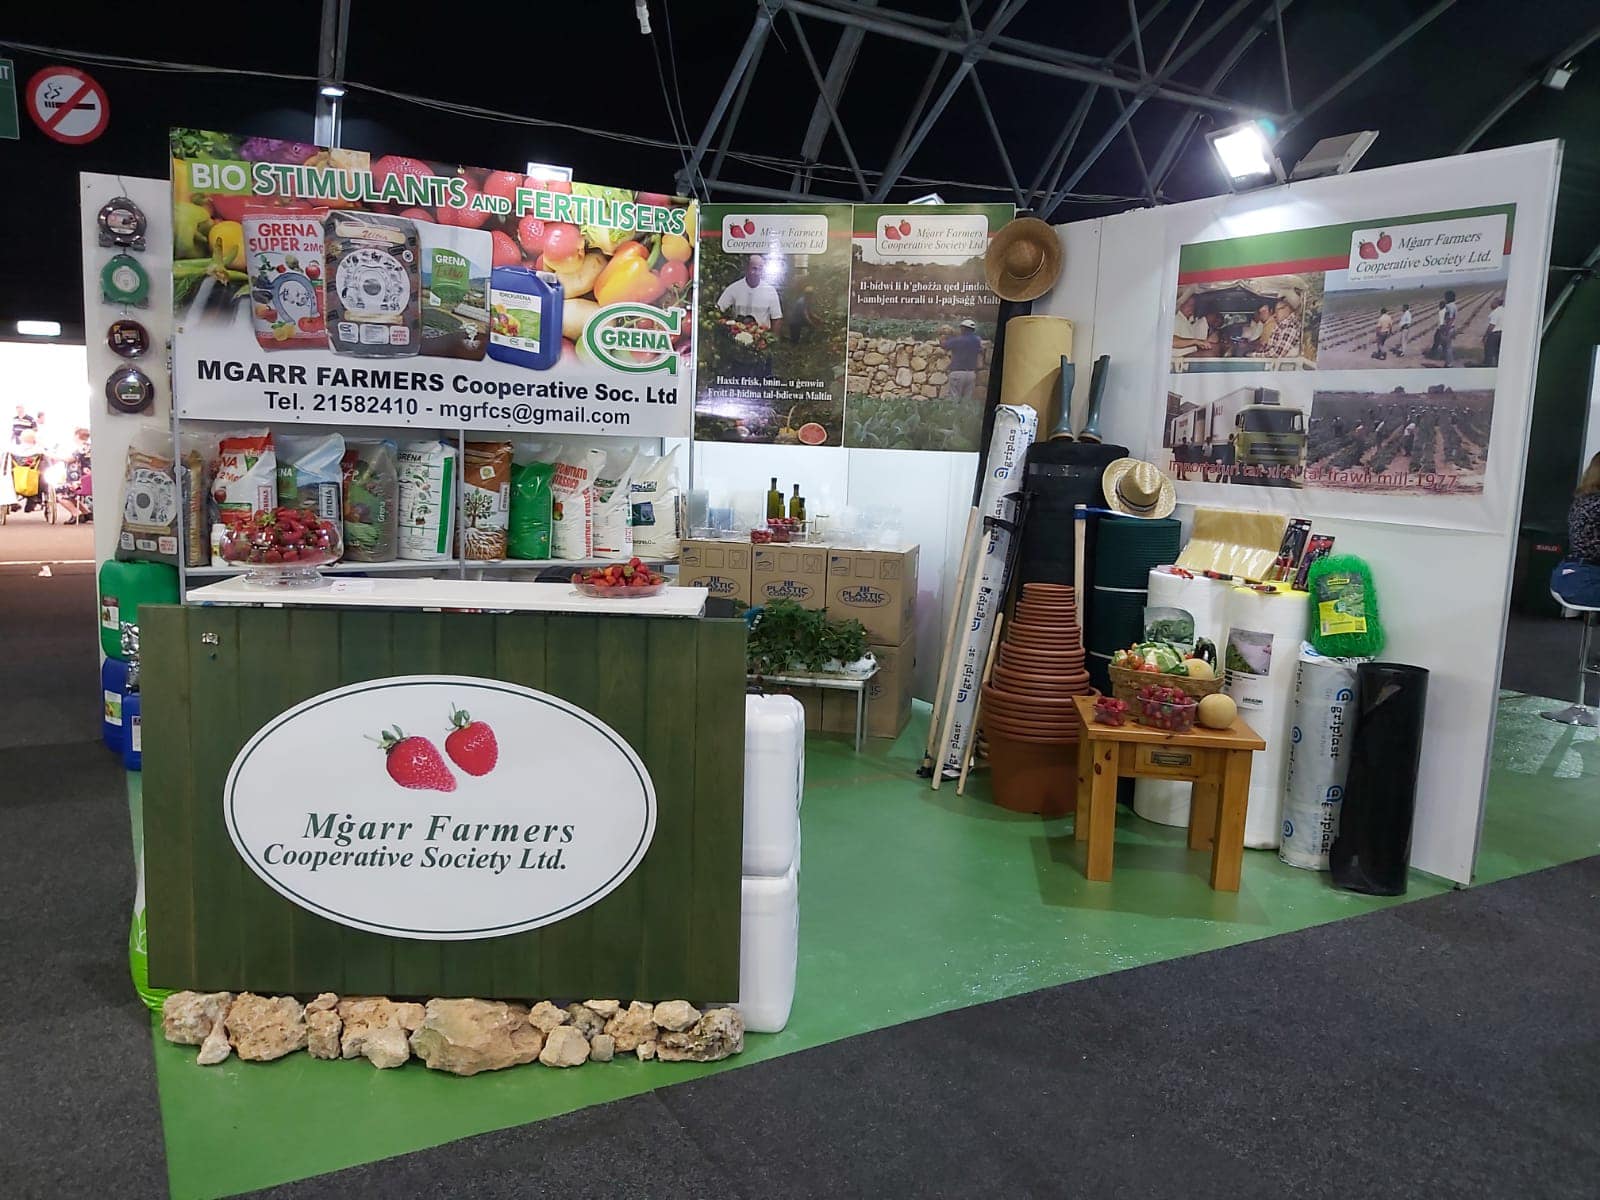 Also present at the Malta Fair with Mgarr Farmers Cooperative